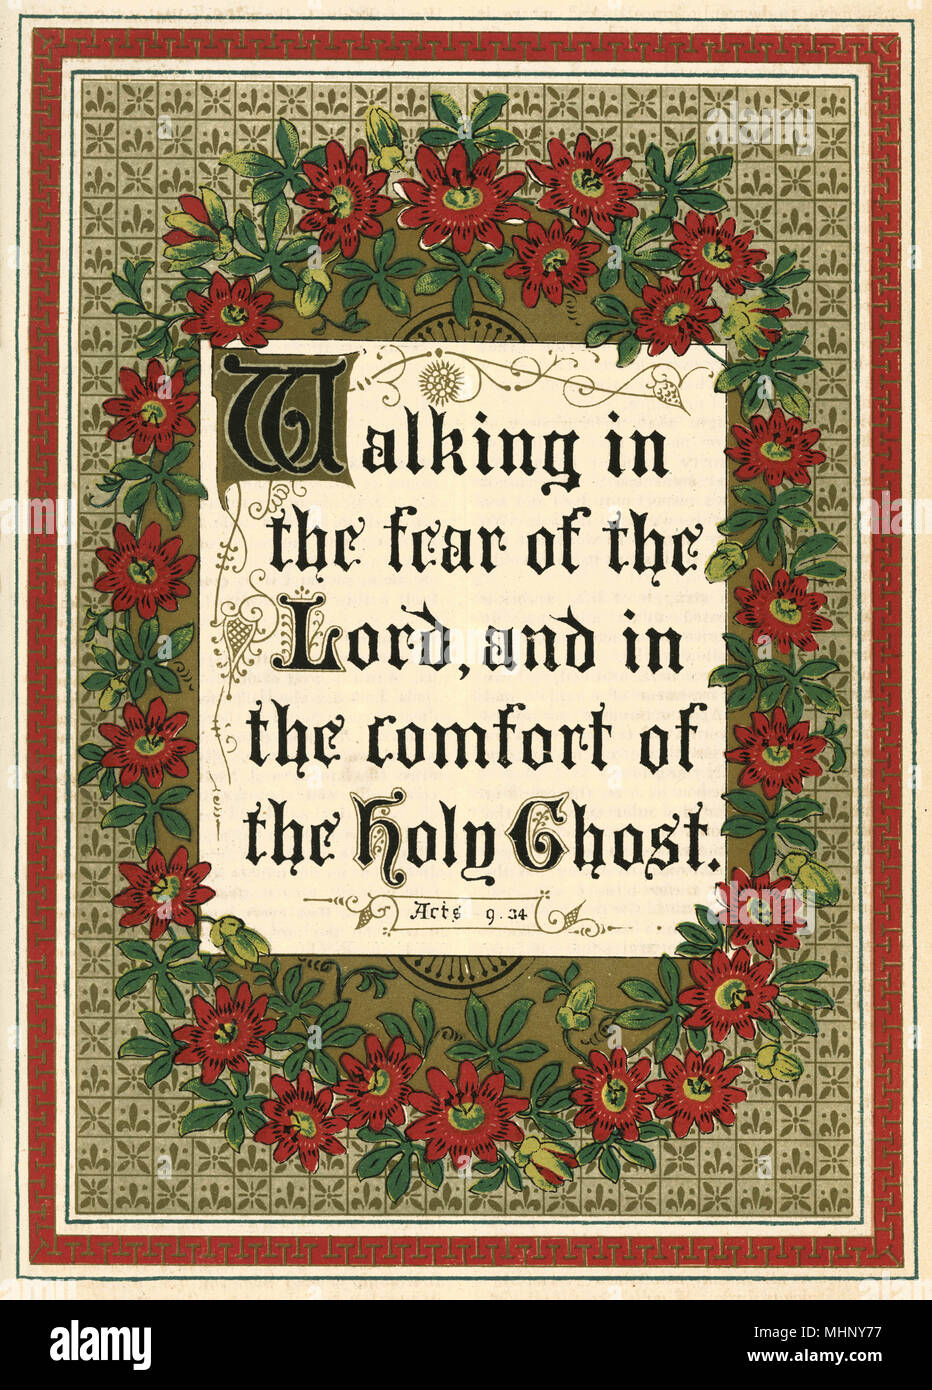 Religious verse, 'Walking in the far of the Lord, and in the comfort of the Holy Christ'.     Date: 1887 Stock Photo